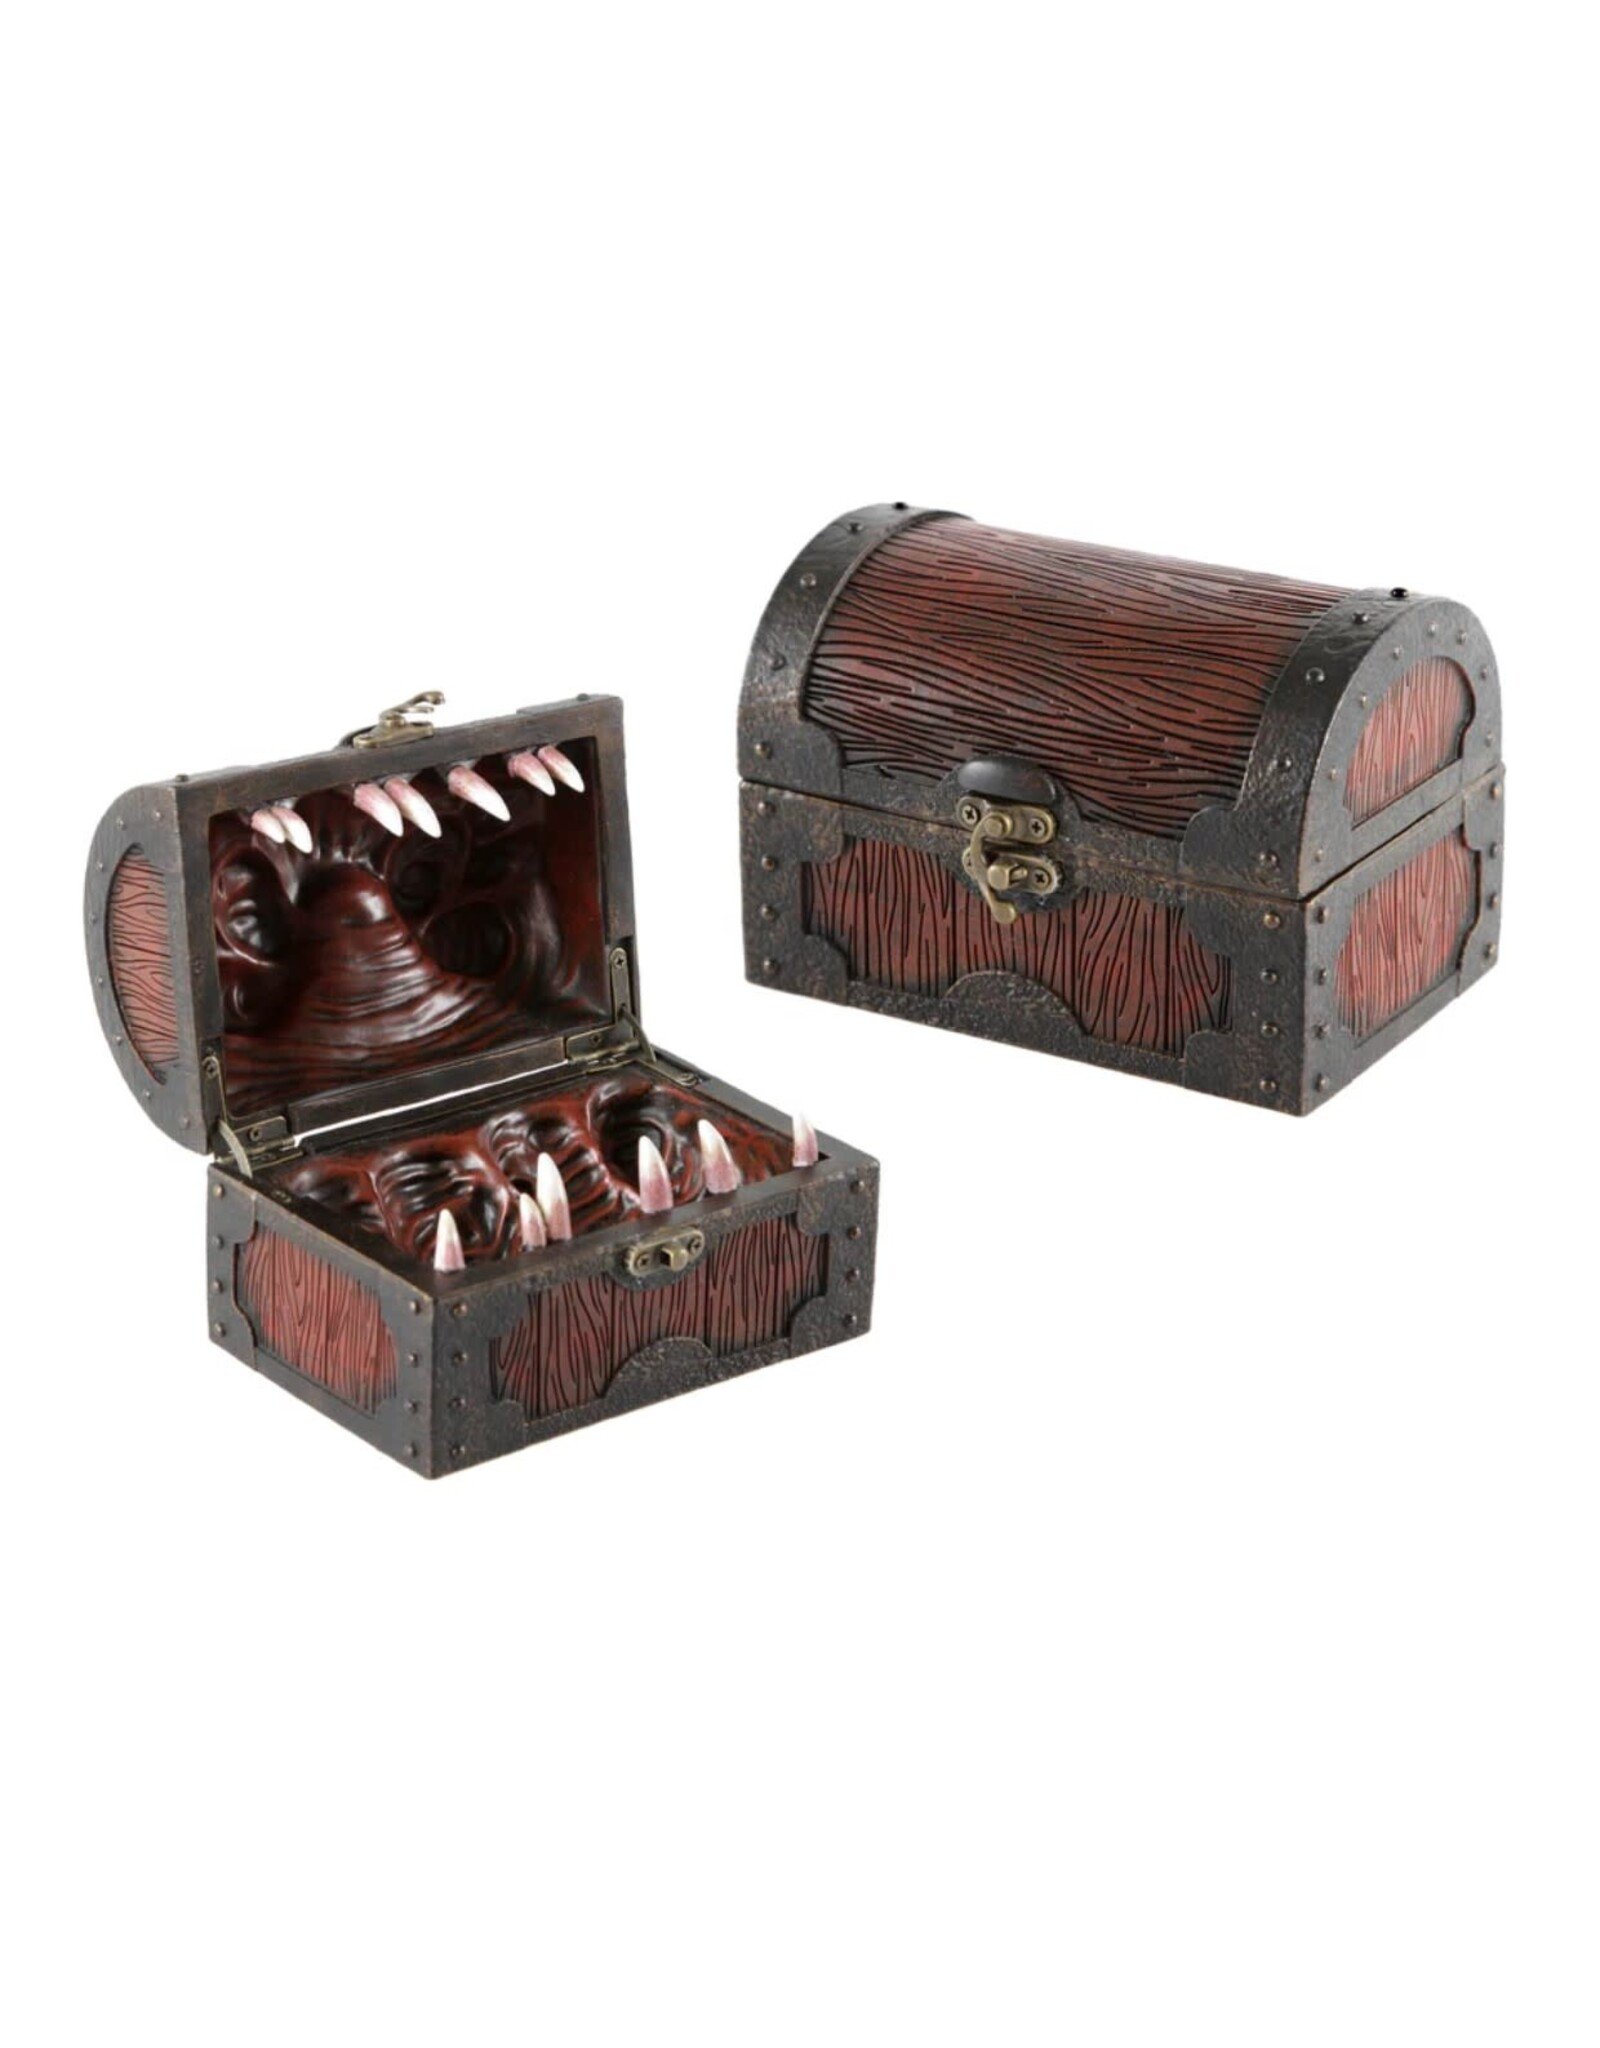 Forged Gaming Forged Mimic Chest Dice Box